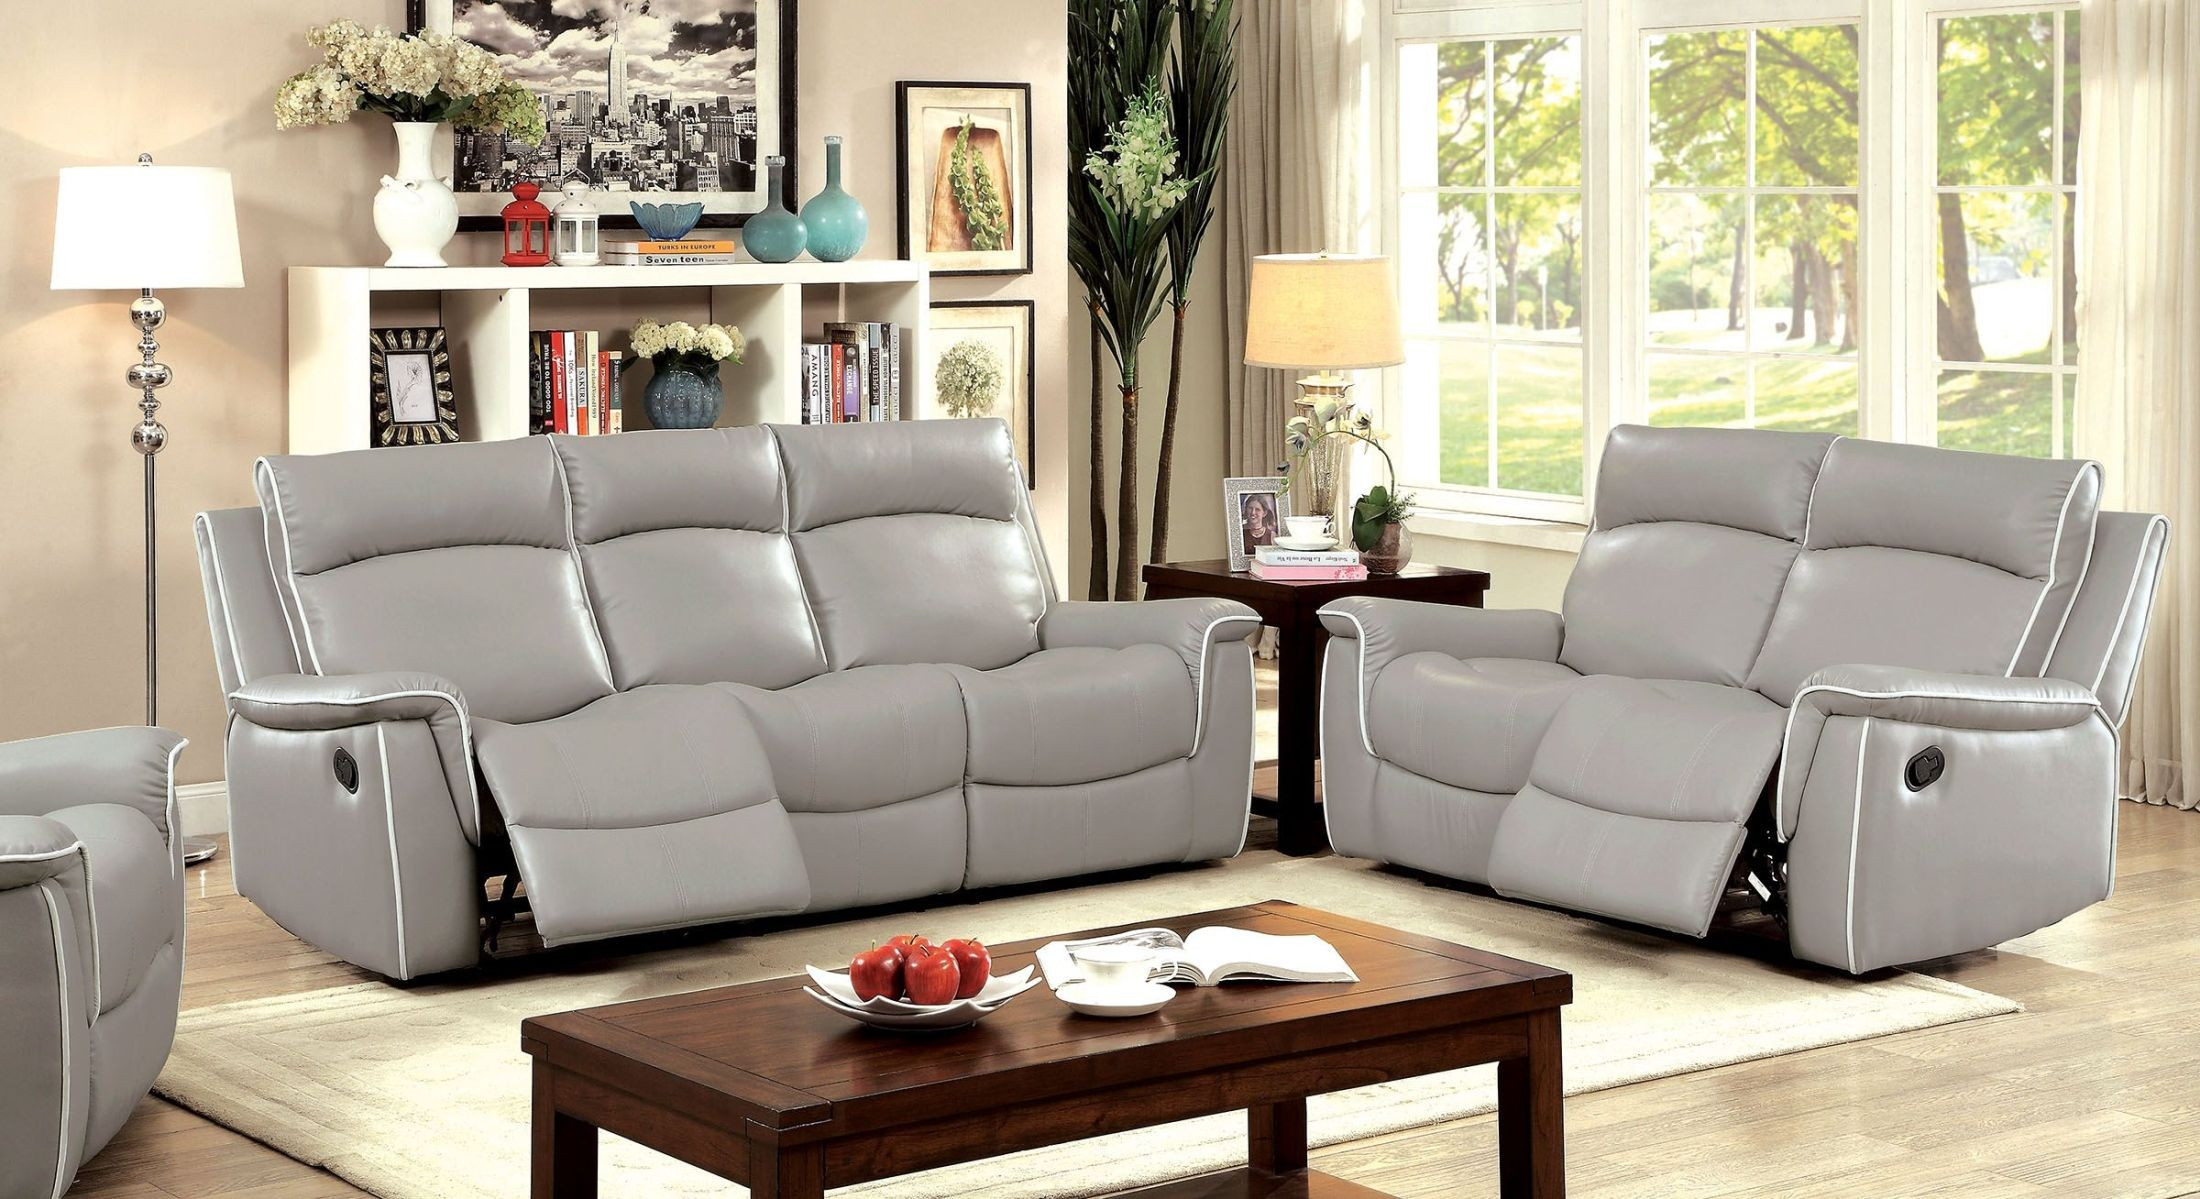 living room ideas with recliner